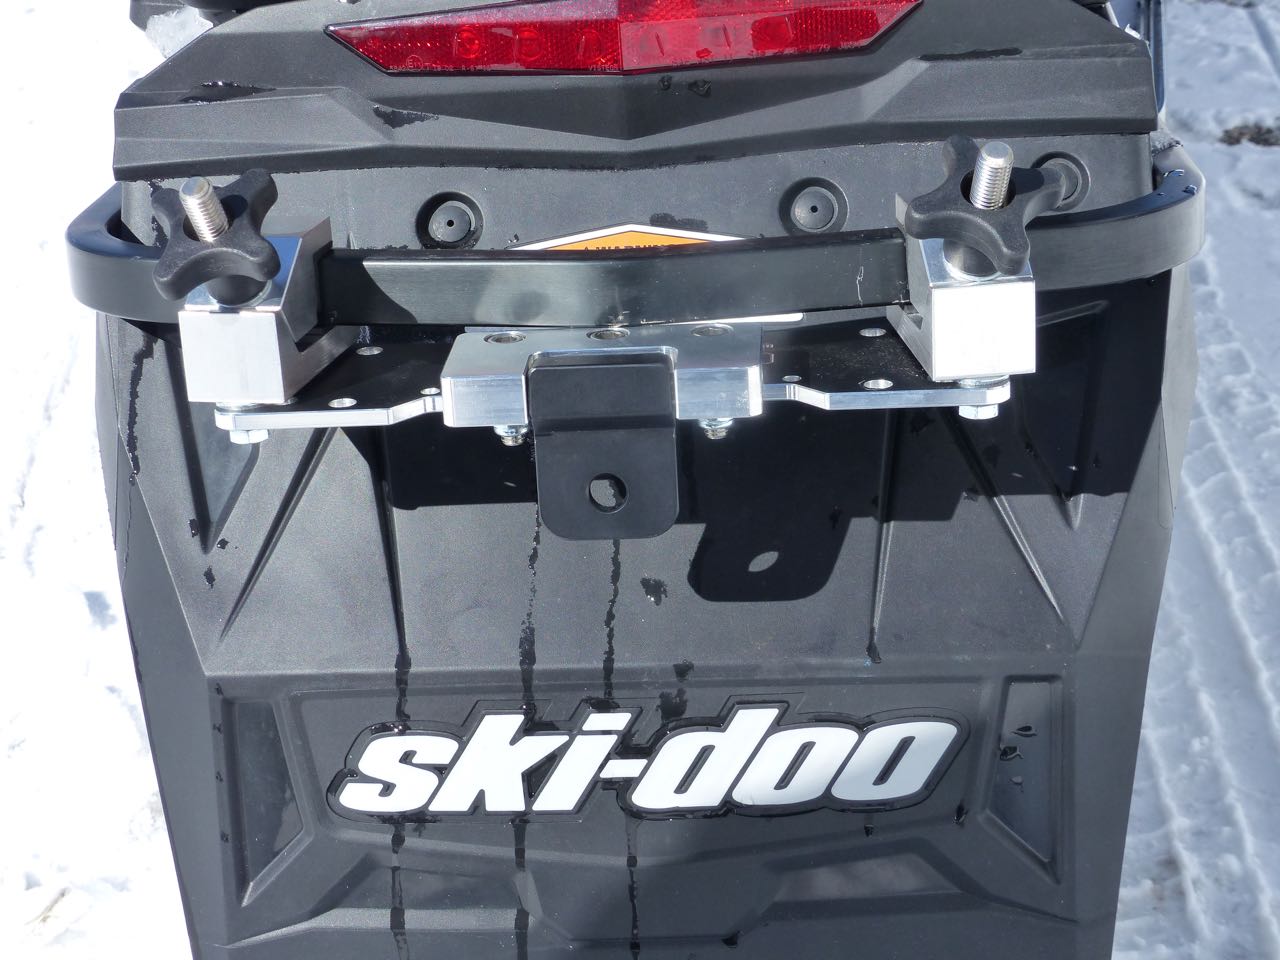 Removable Snowmobile Hitch Review